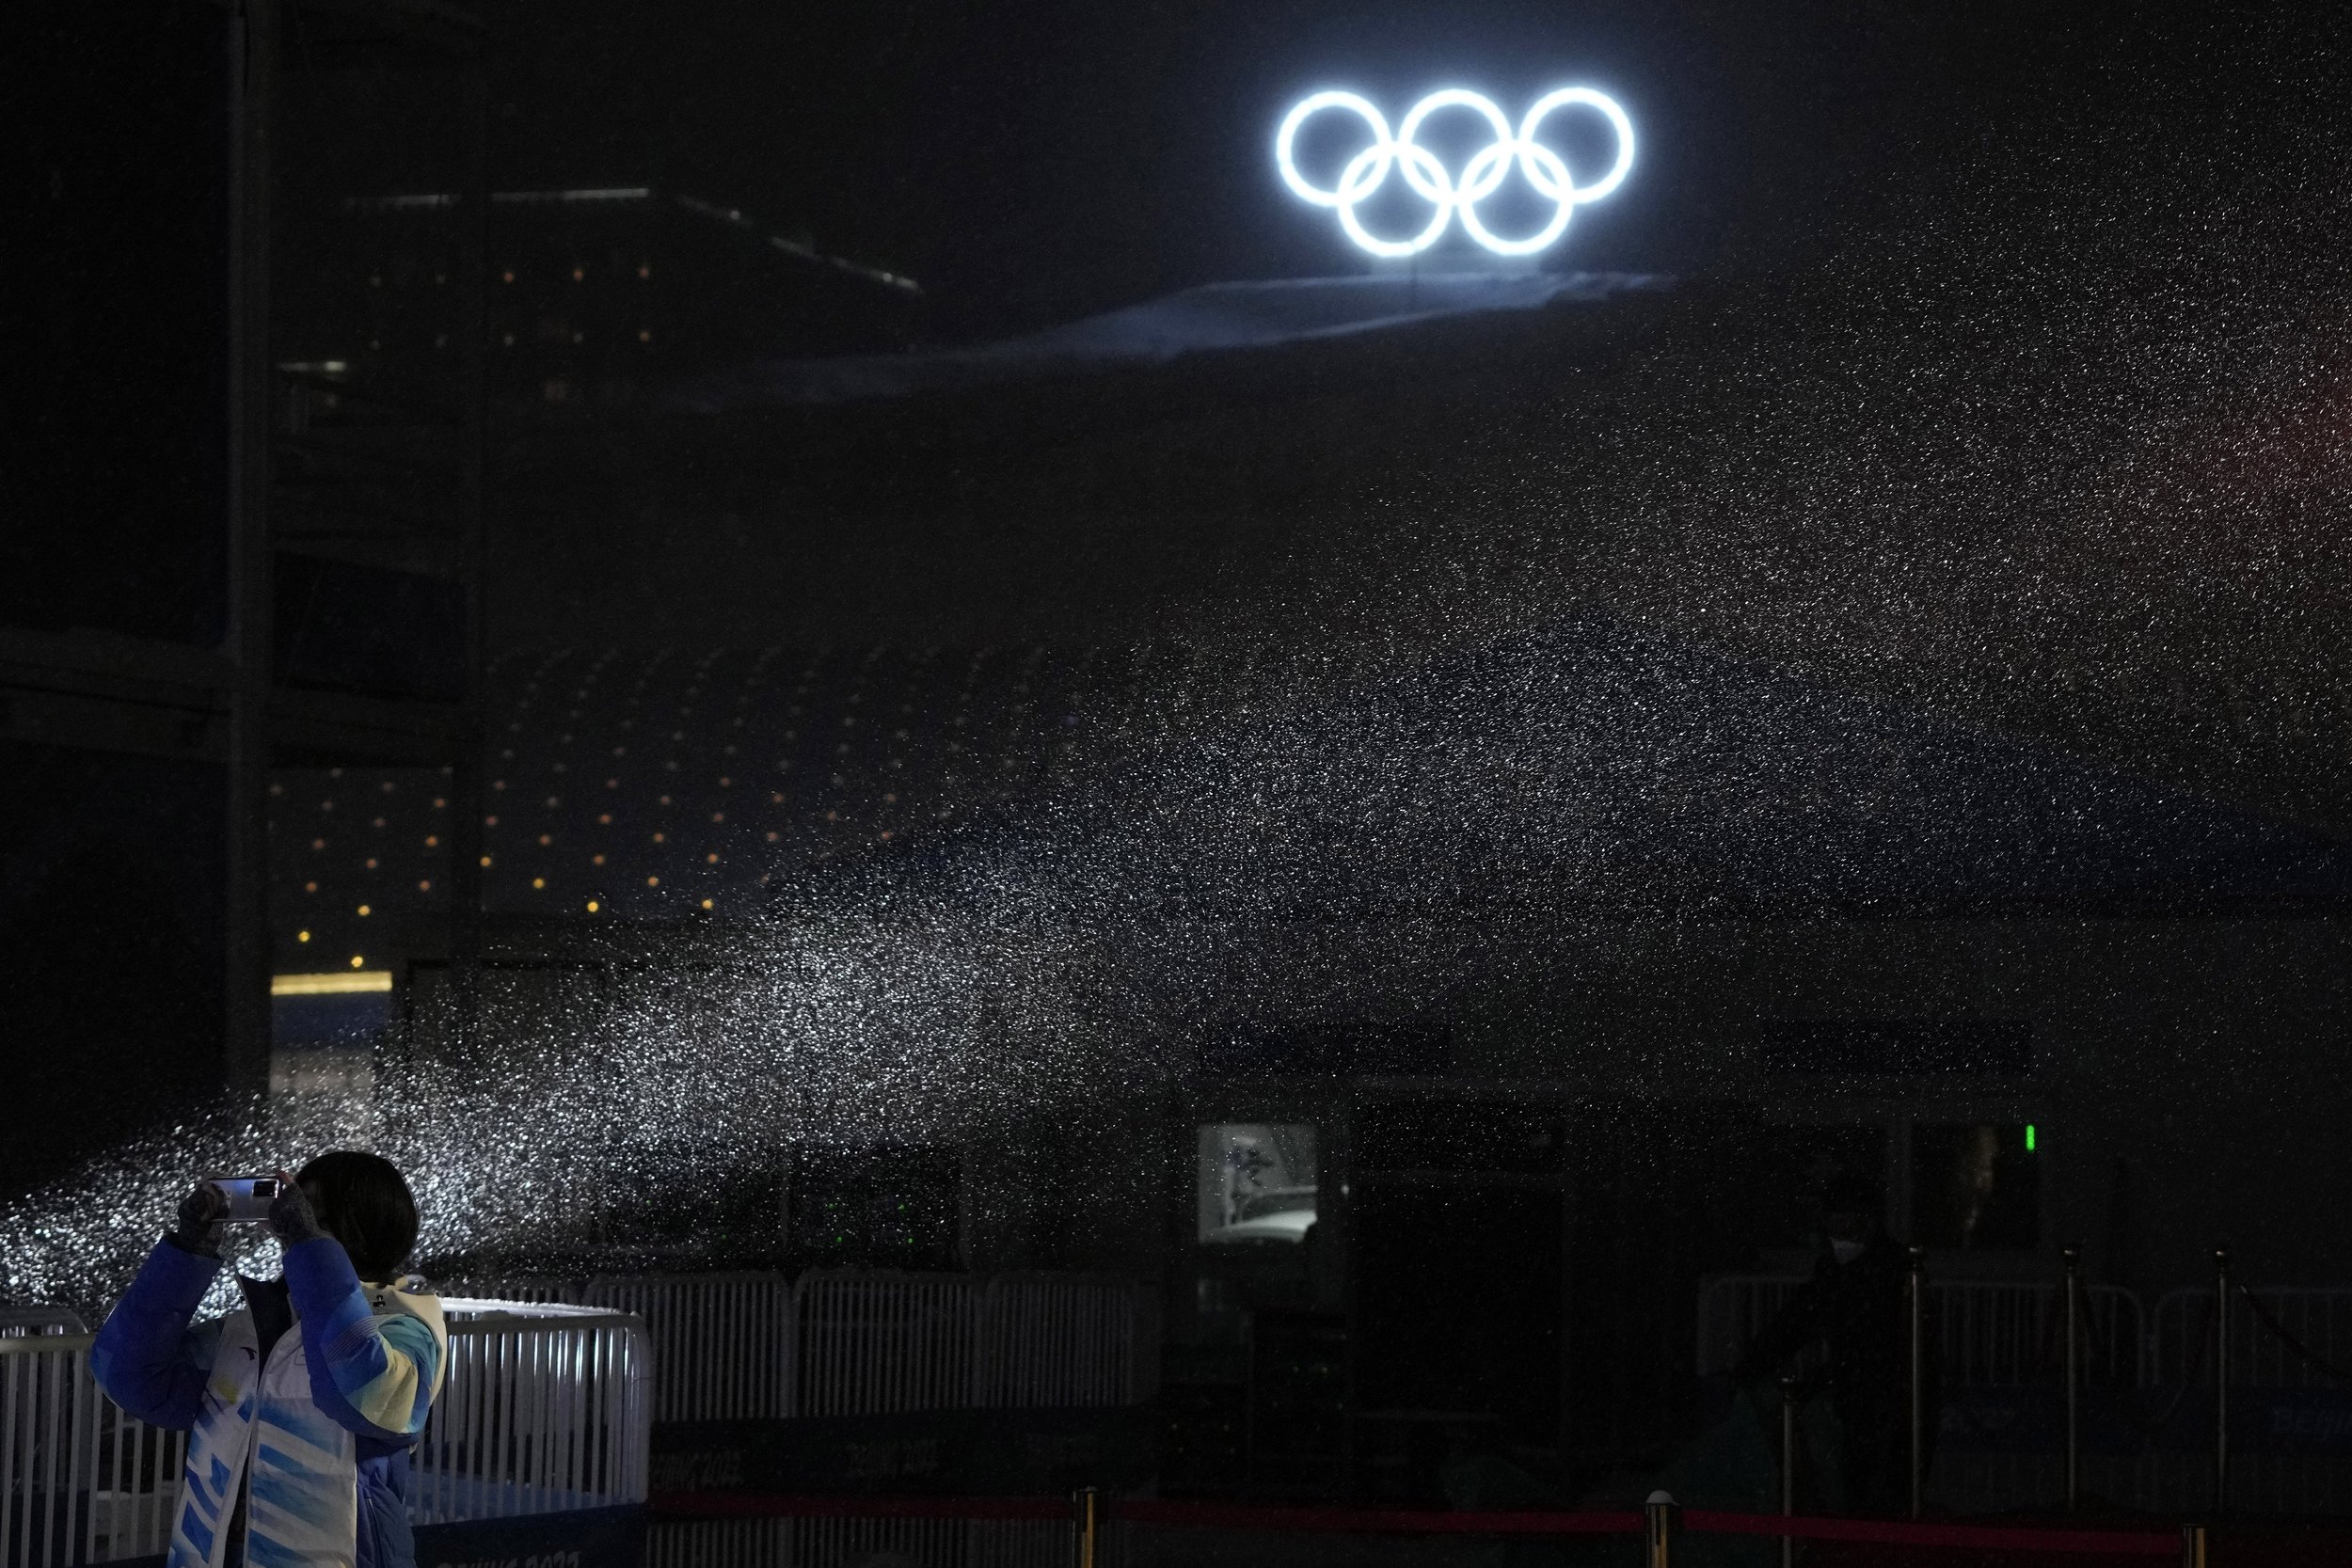  Snow falls after a medal ceremony at the 2022 Winter Olympics, Sunday, Feb. 13, 2022, in Zhangjiakou, China. (AP Photo/Aaron Favila) 